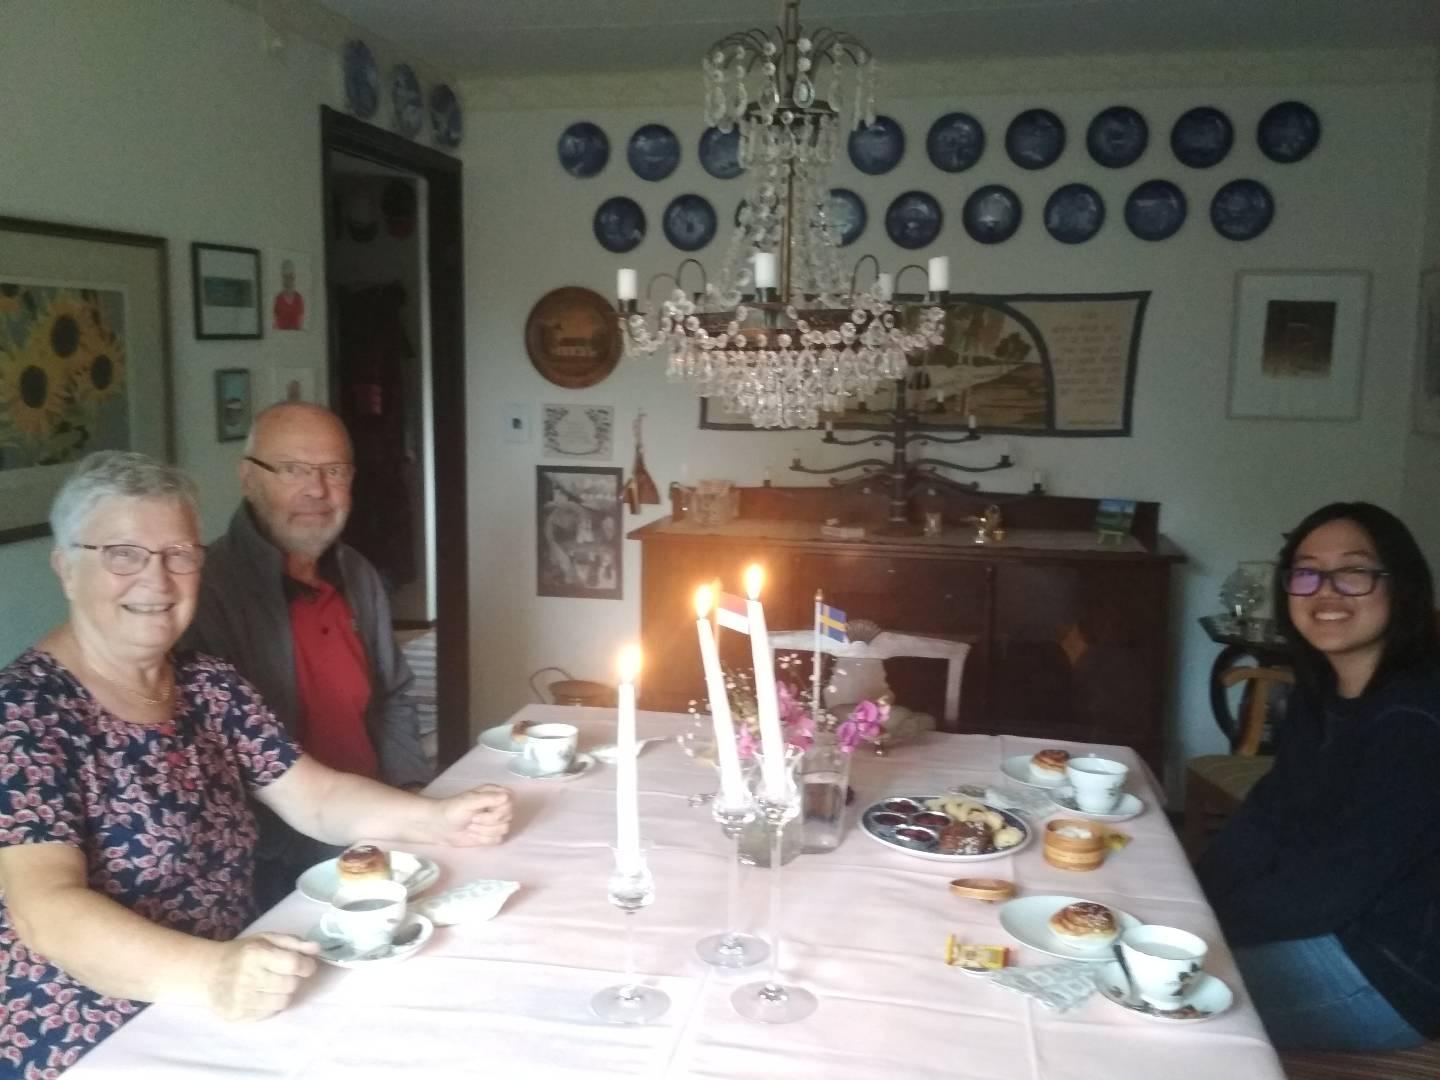 A group of people sitting around a table with food and candles

Description automatically generated with medium confidence